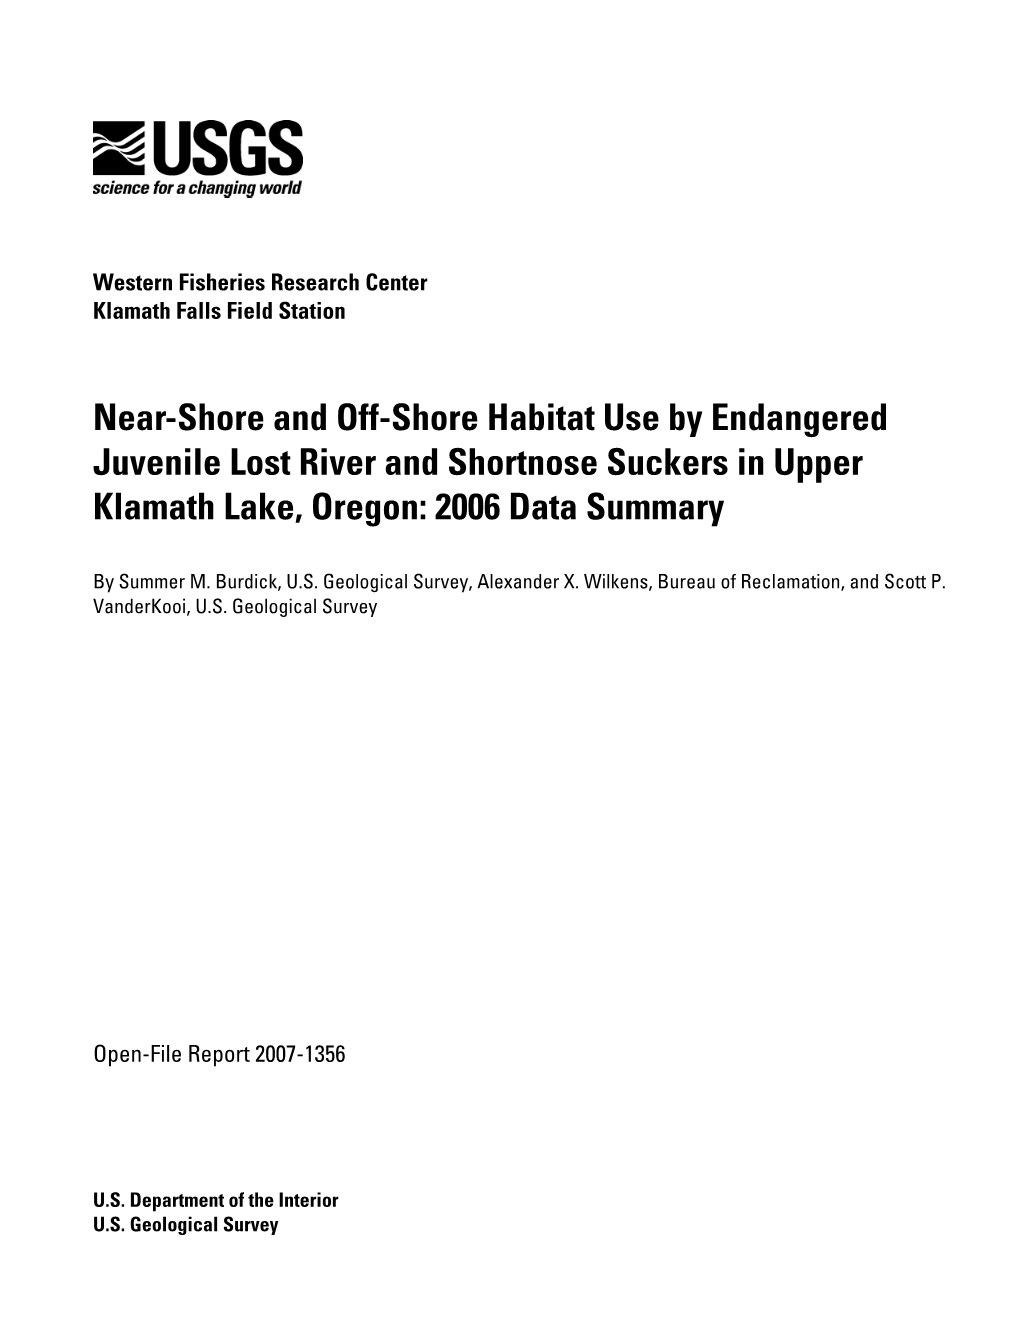 Near-Shore and Off-Shore Habitat Use by Endangered Juvenile Lost River and Shortnose Suckers in Upper Klamath Lake, Oregon: 2006 Data Summary